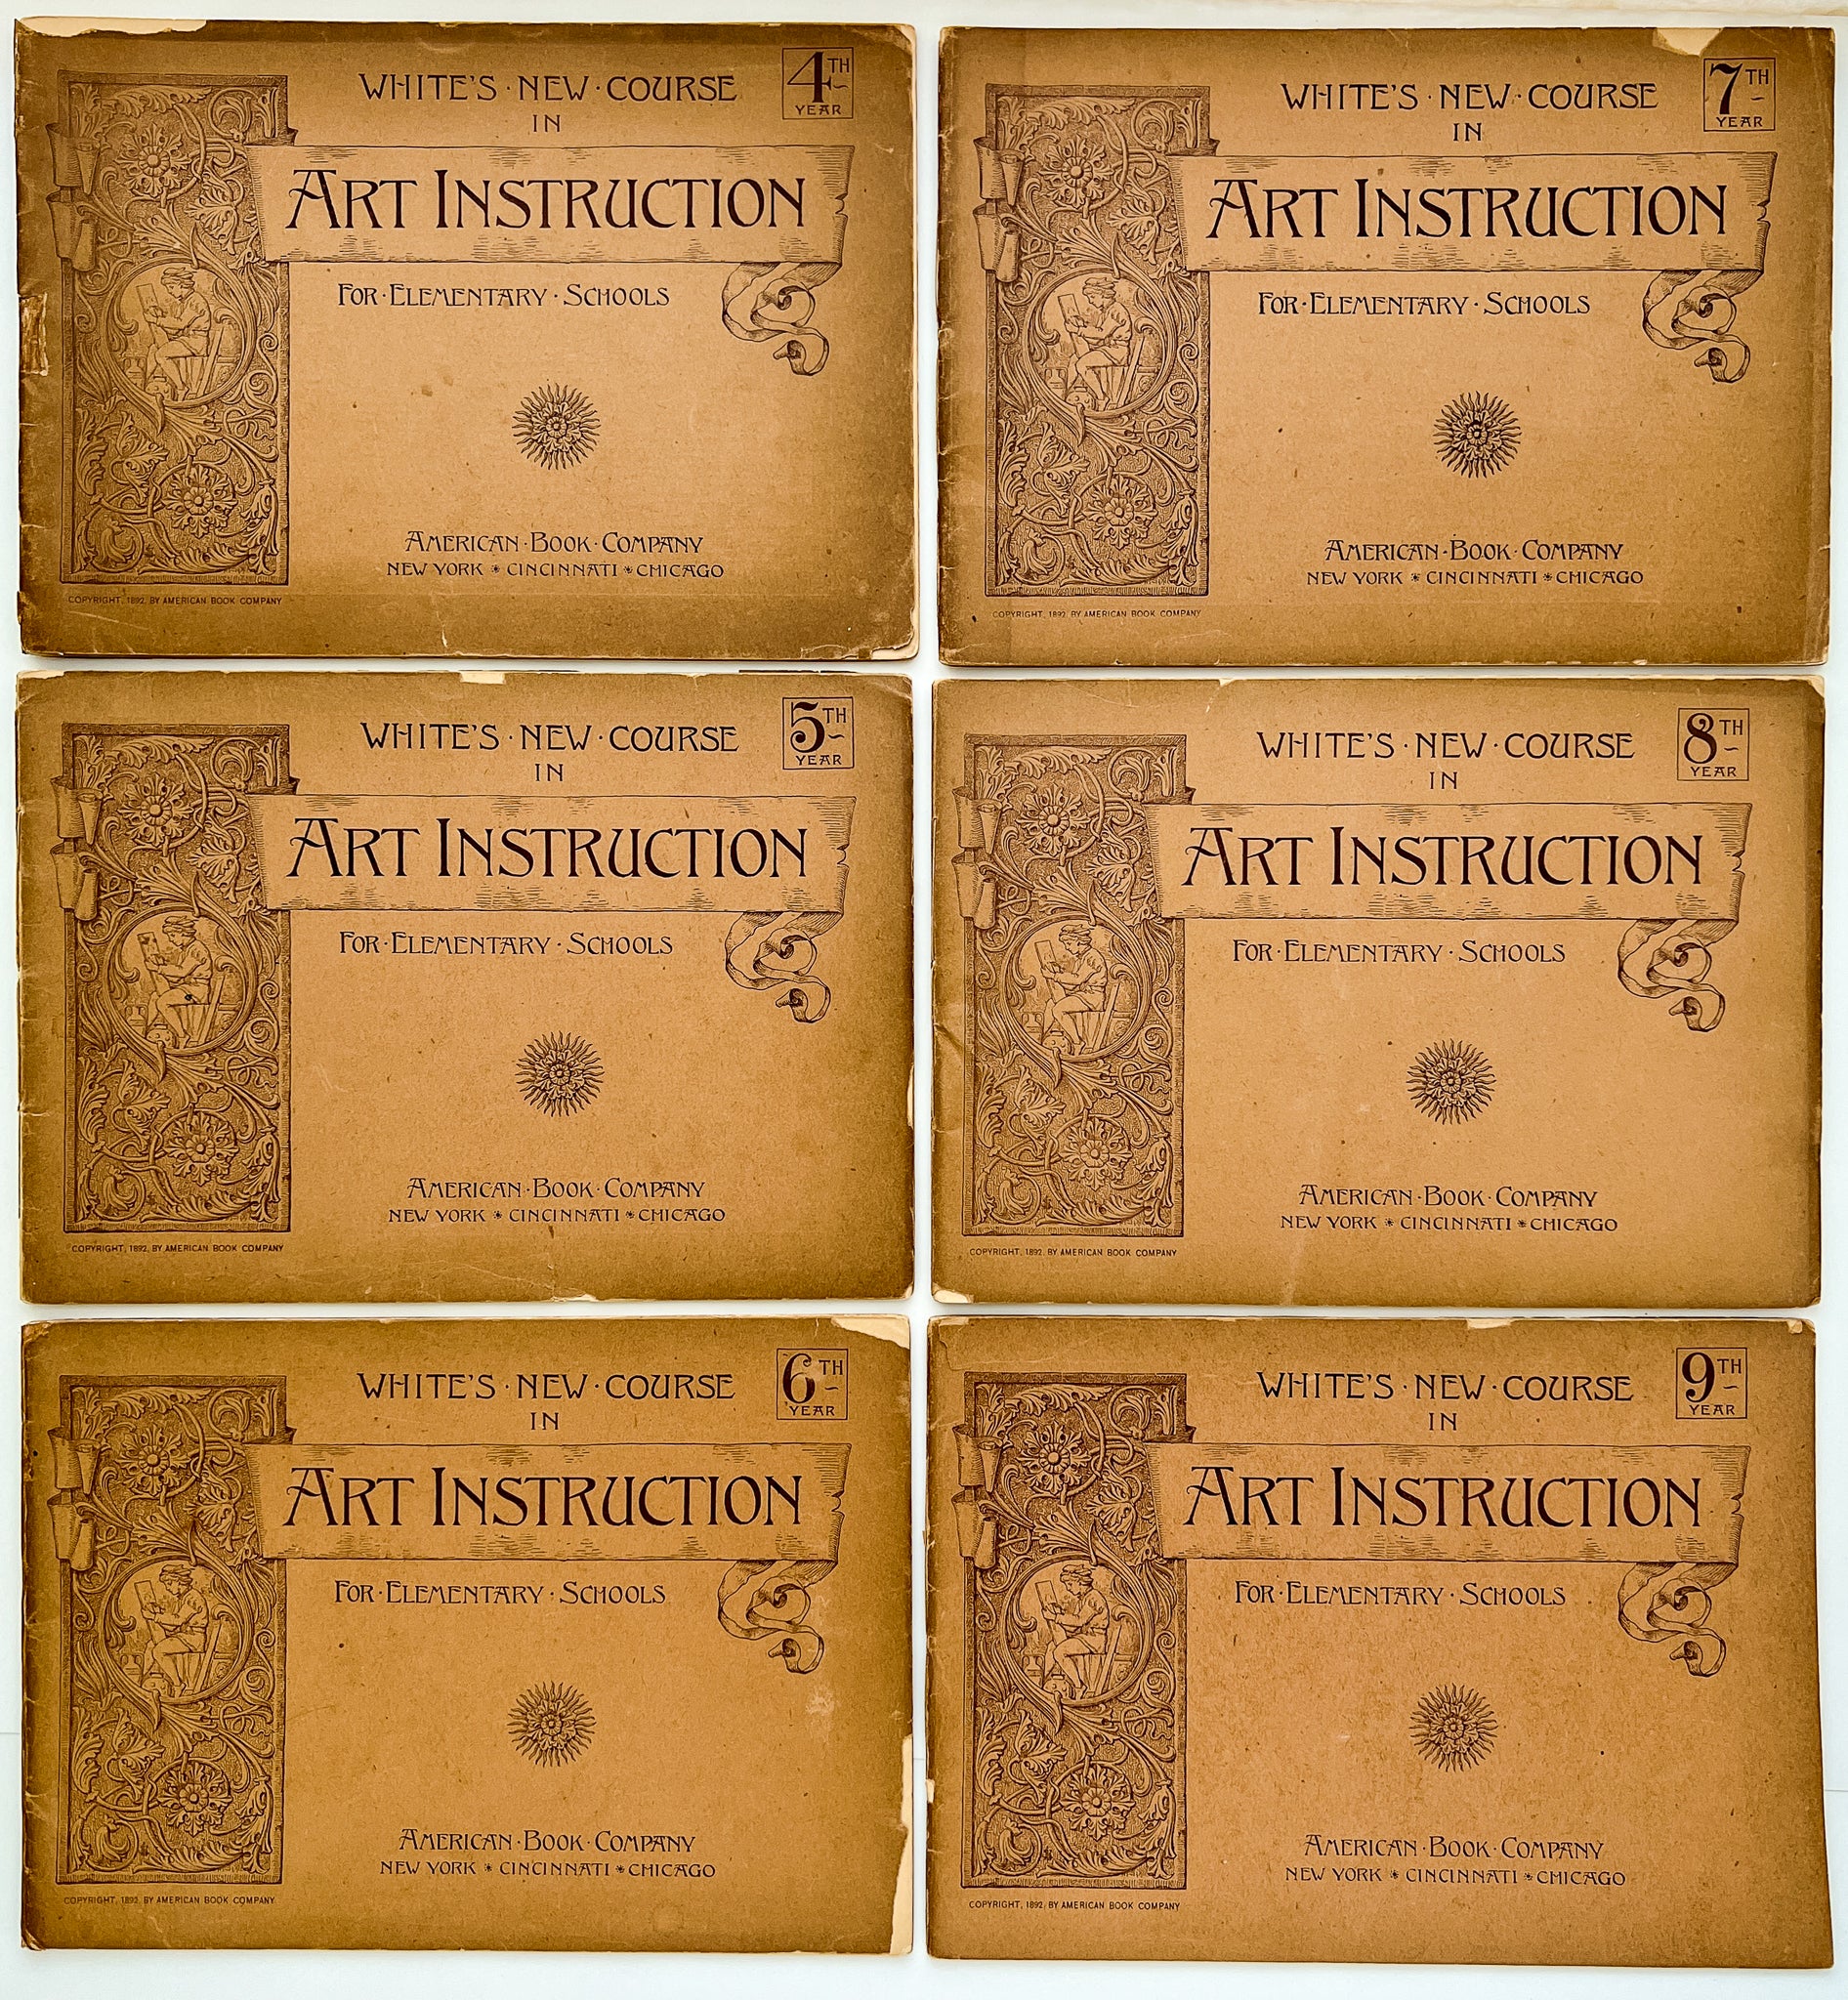 White's New Course in Art Instruction for Elementary Schools drawing workbooks for Year 4, 5, 6, 7, 8, 9 (6 volumes, unused)